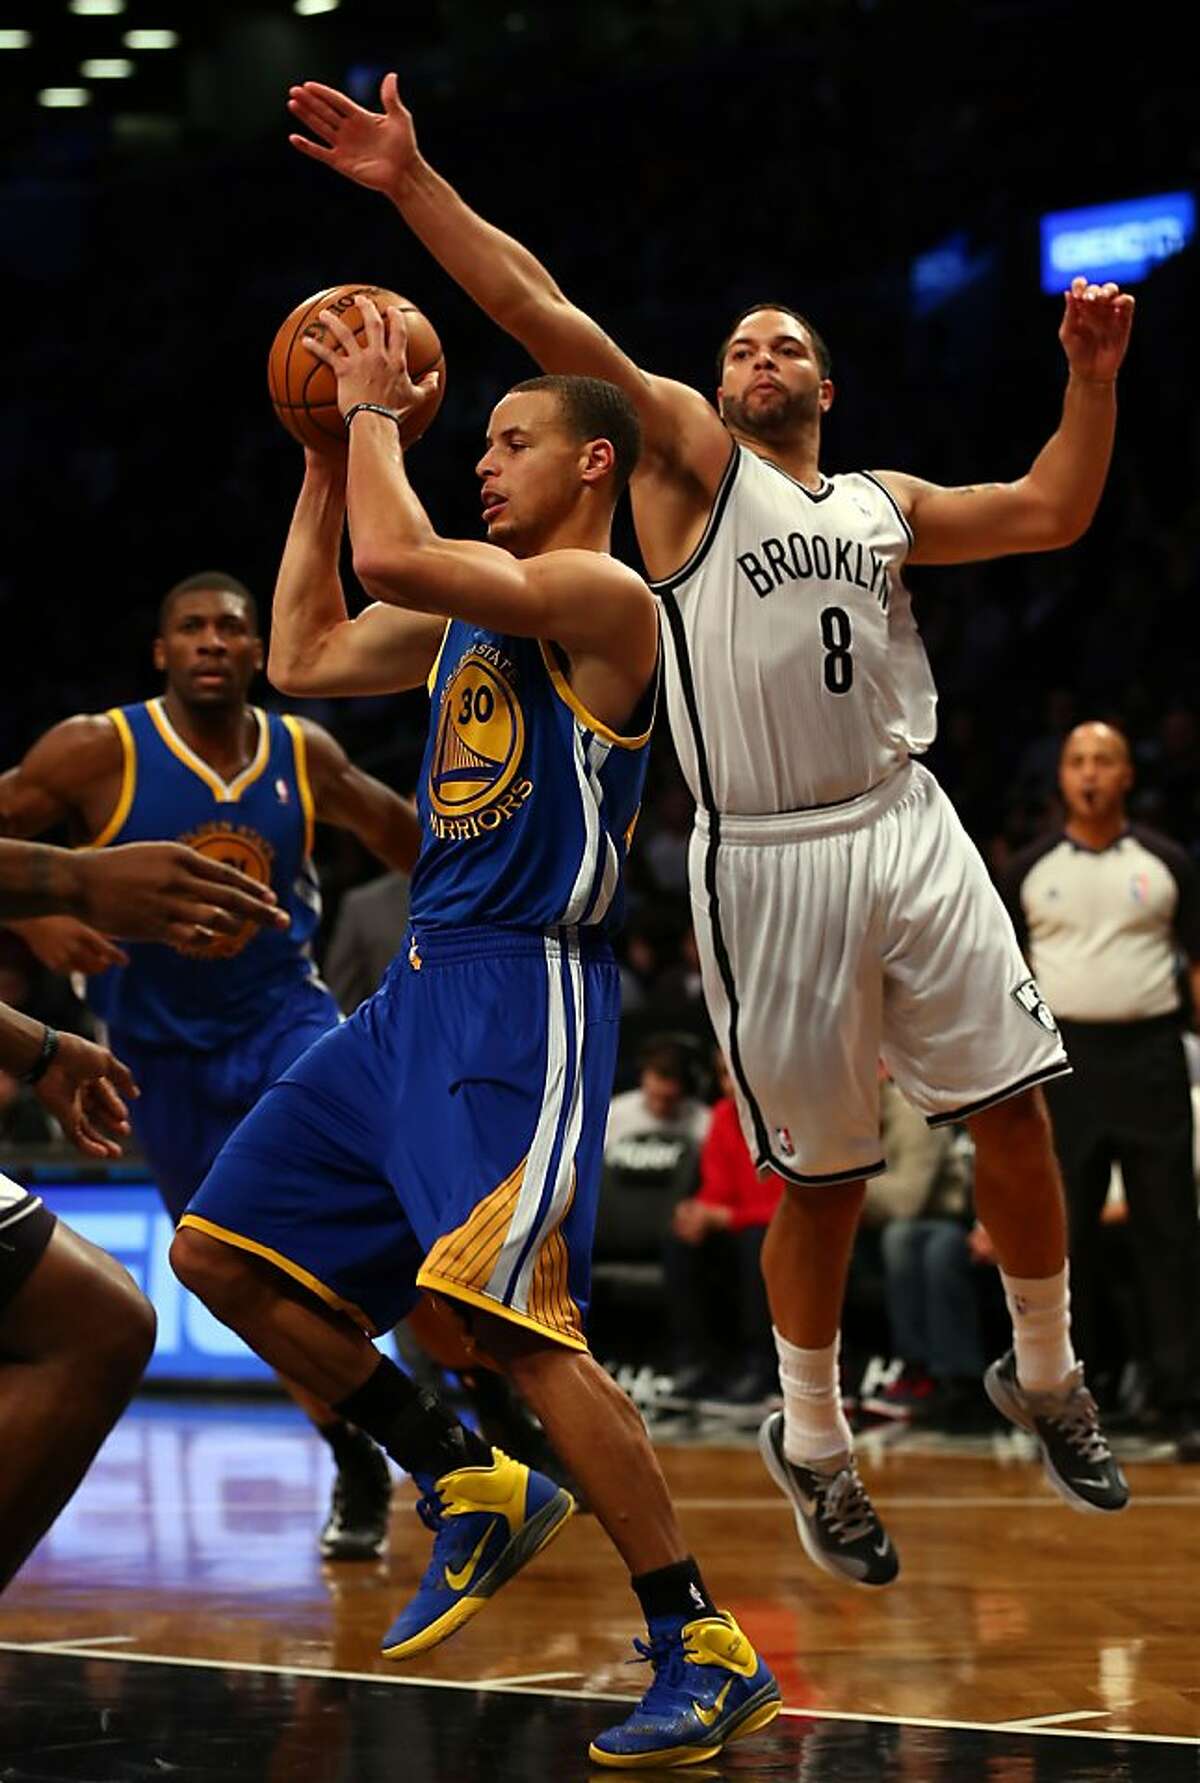 NEW YORK, NY - DECEMBER 07: Stephen Curry #30 of the Golden State Warriors tries to pass as Deron Williams #8 of the Brooklyn Nets defends on December 7, 2012 at the Barclays Center in the Brooklyn borough of New York City. NOTE TO USER: User expressly acknowledges and agrees that, by downloading and/or using this photograph, user is consenting to the terms and conditions of the Getty Images License Agreement. (Photo by Elsa/Getty Images)